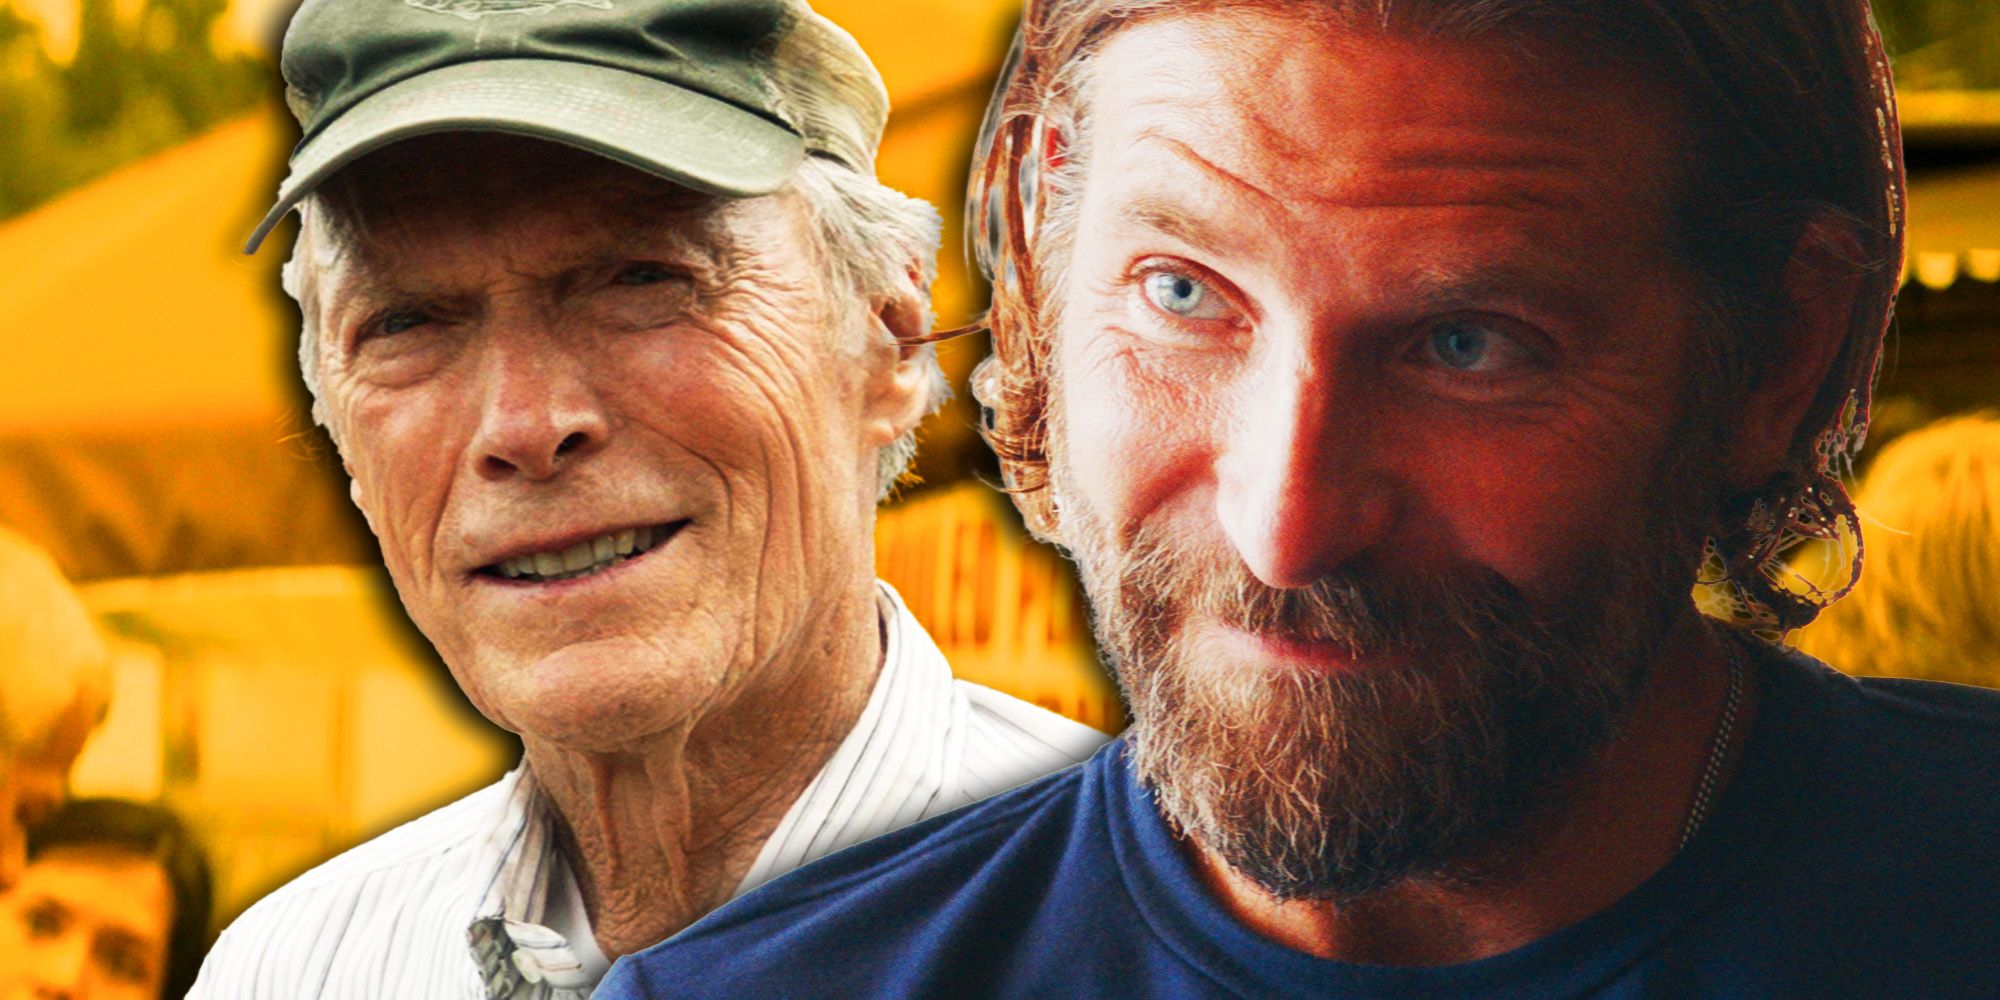 Clint Eastwood and Bradley Cooper as Jackson Maine in A Star is Born